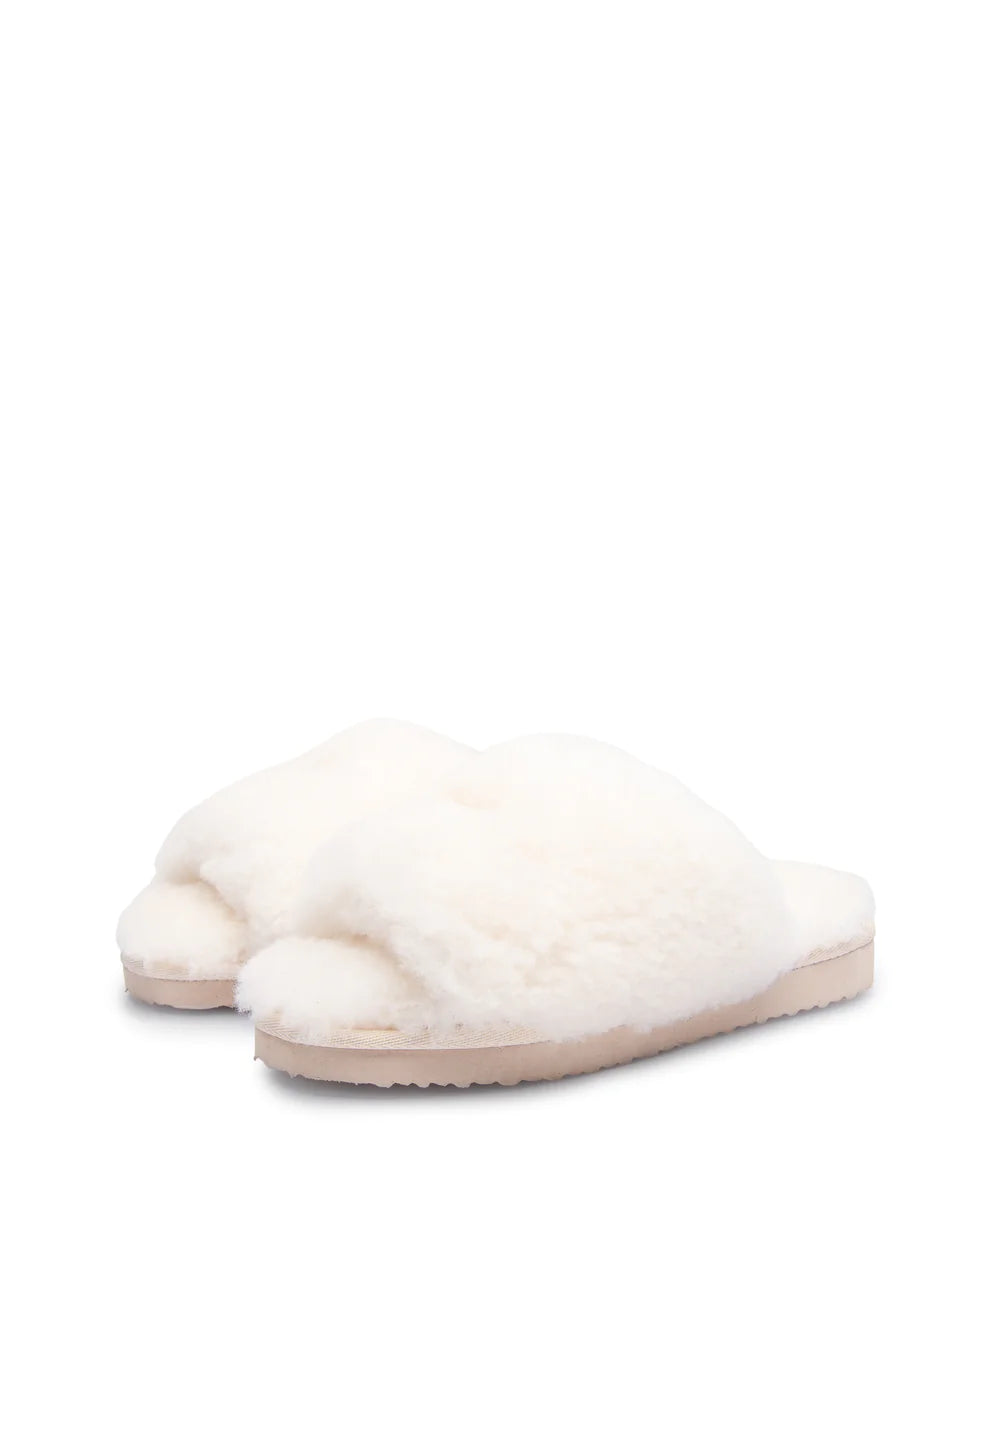 FOR SLIPPERS OFF WHITE